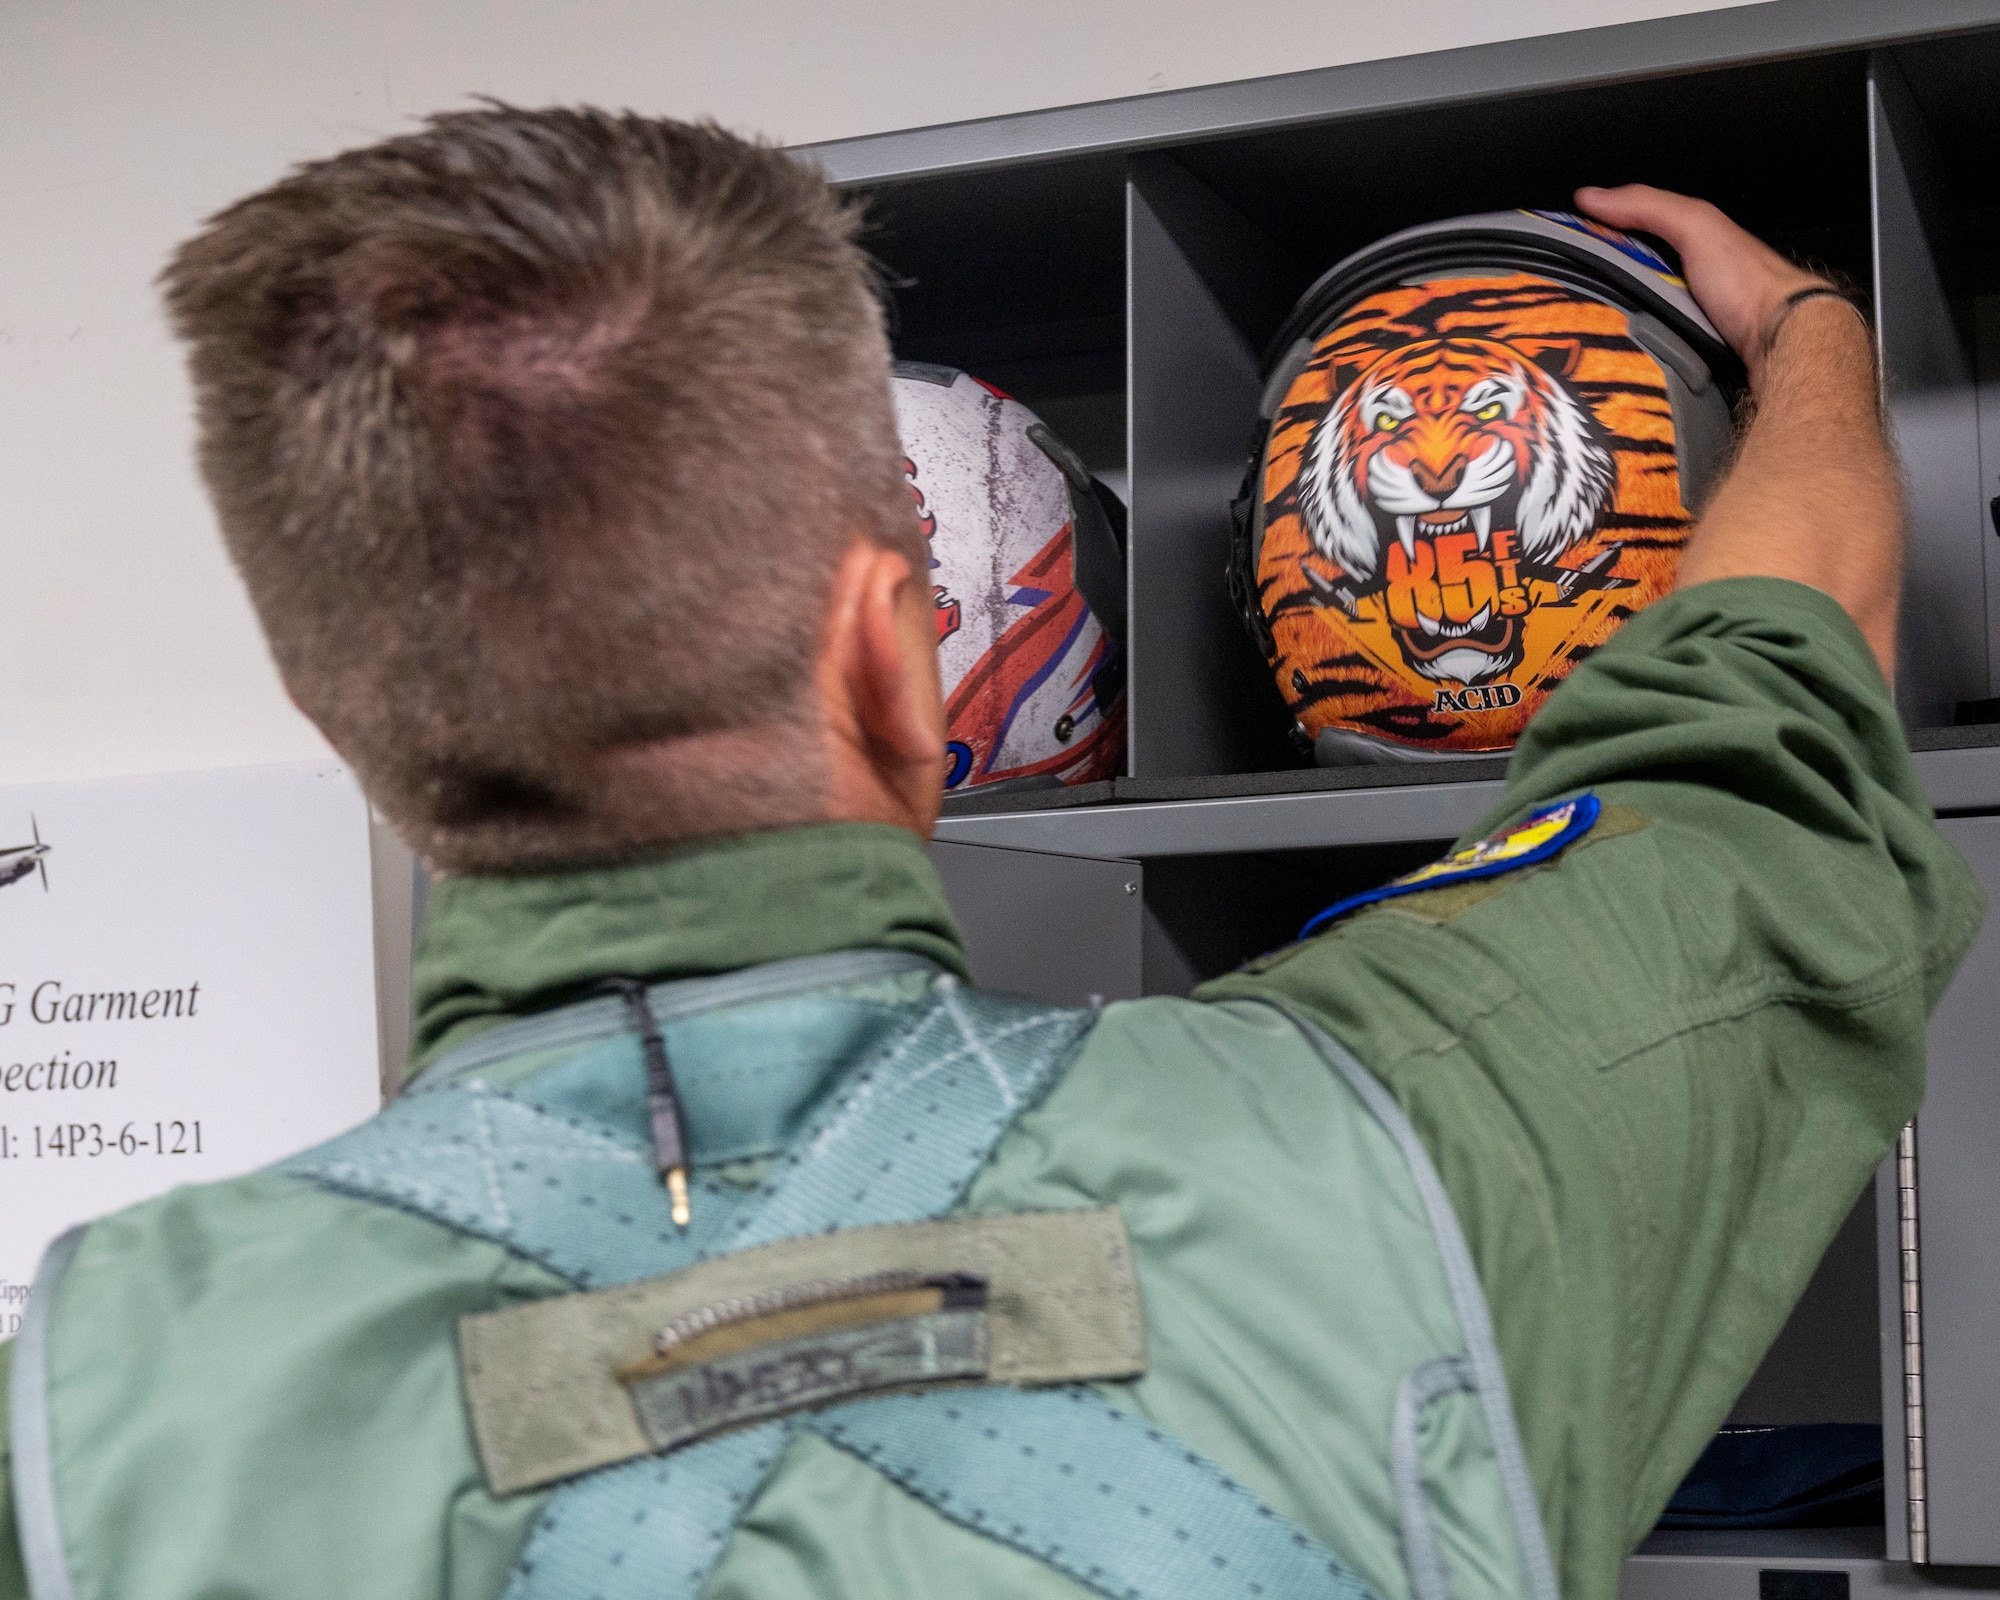 U.S. Air Force Lt. Col. Brian “Tiger King” Tripp, 85th Flying Training Squadron commander, grabs his flight helmet on Tiger Day before his flight at Laughlin Air Force Base, Texas on August 5, 2021. Pilots on Tiger Day took to the sky to celebrate their heritage for being a part of the 85th Flying Training Squadron in a competition against fellow instructor pilots. (U.S. Air Force Photo by Senior Airman Nicholas Larsen)